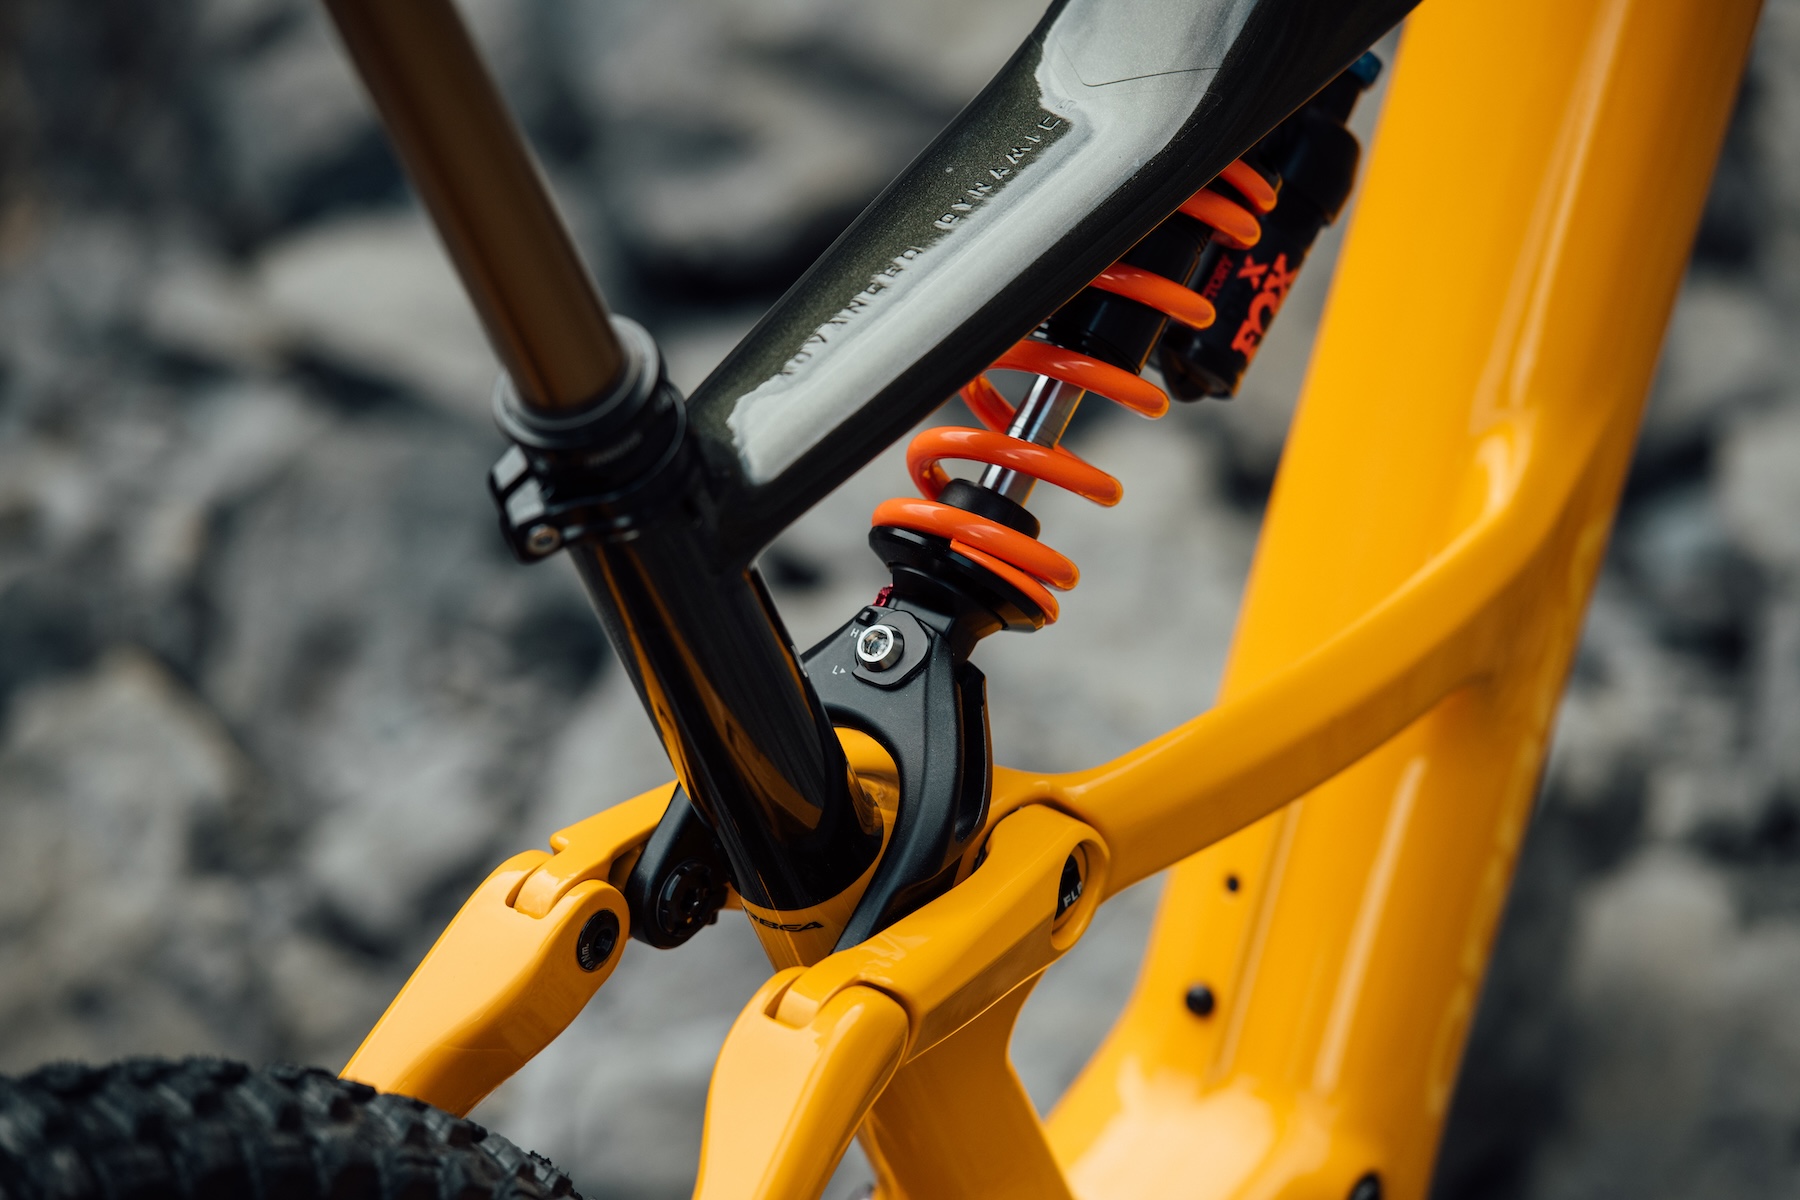 Zack Henderson reviews the Orbea Rise